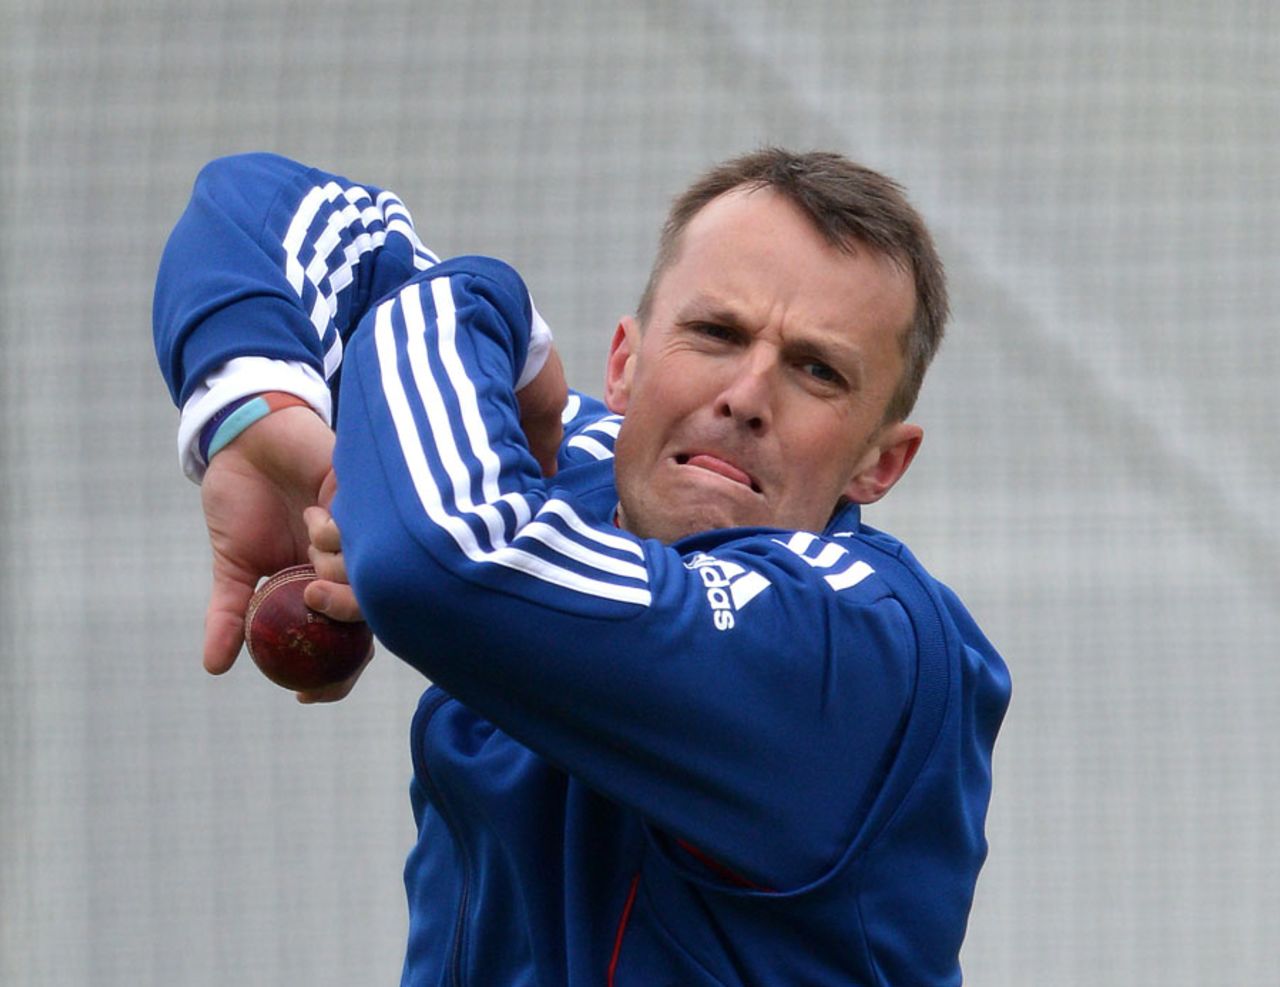 Graeme Swann in the nets at Lord's, England v New Zealand, 1st Test, Lord's, May, 15, 2013